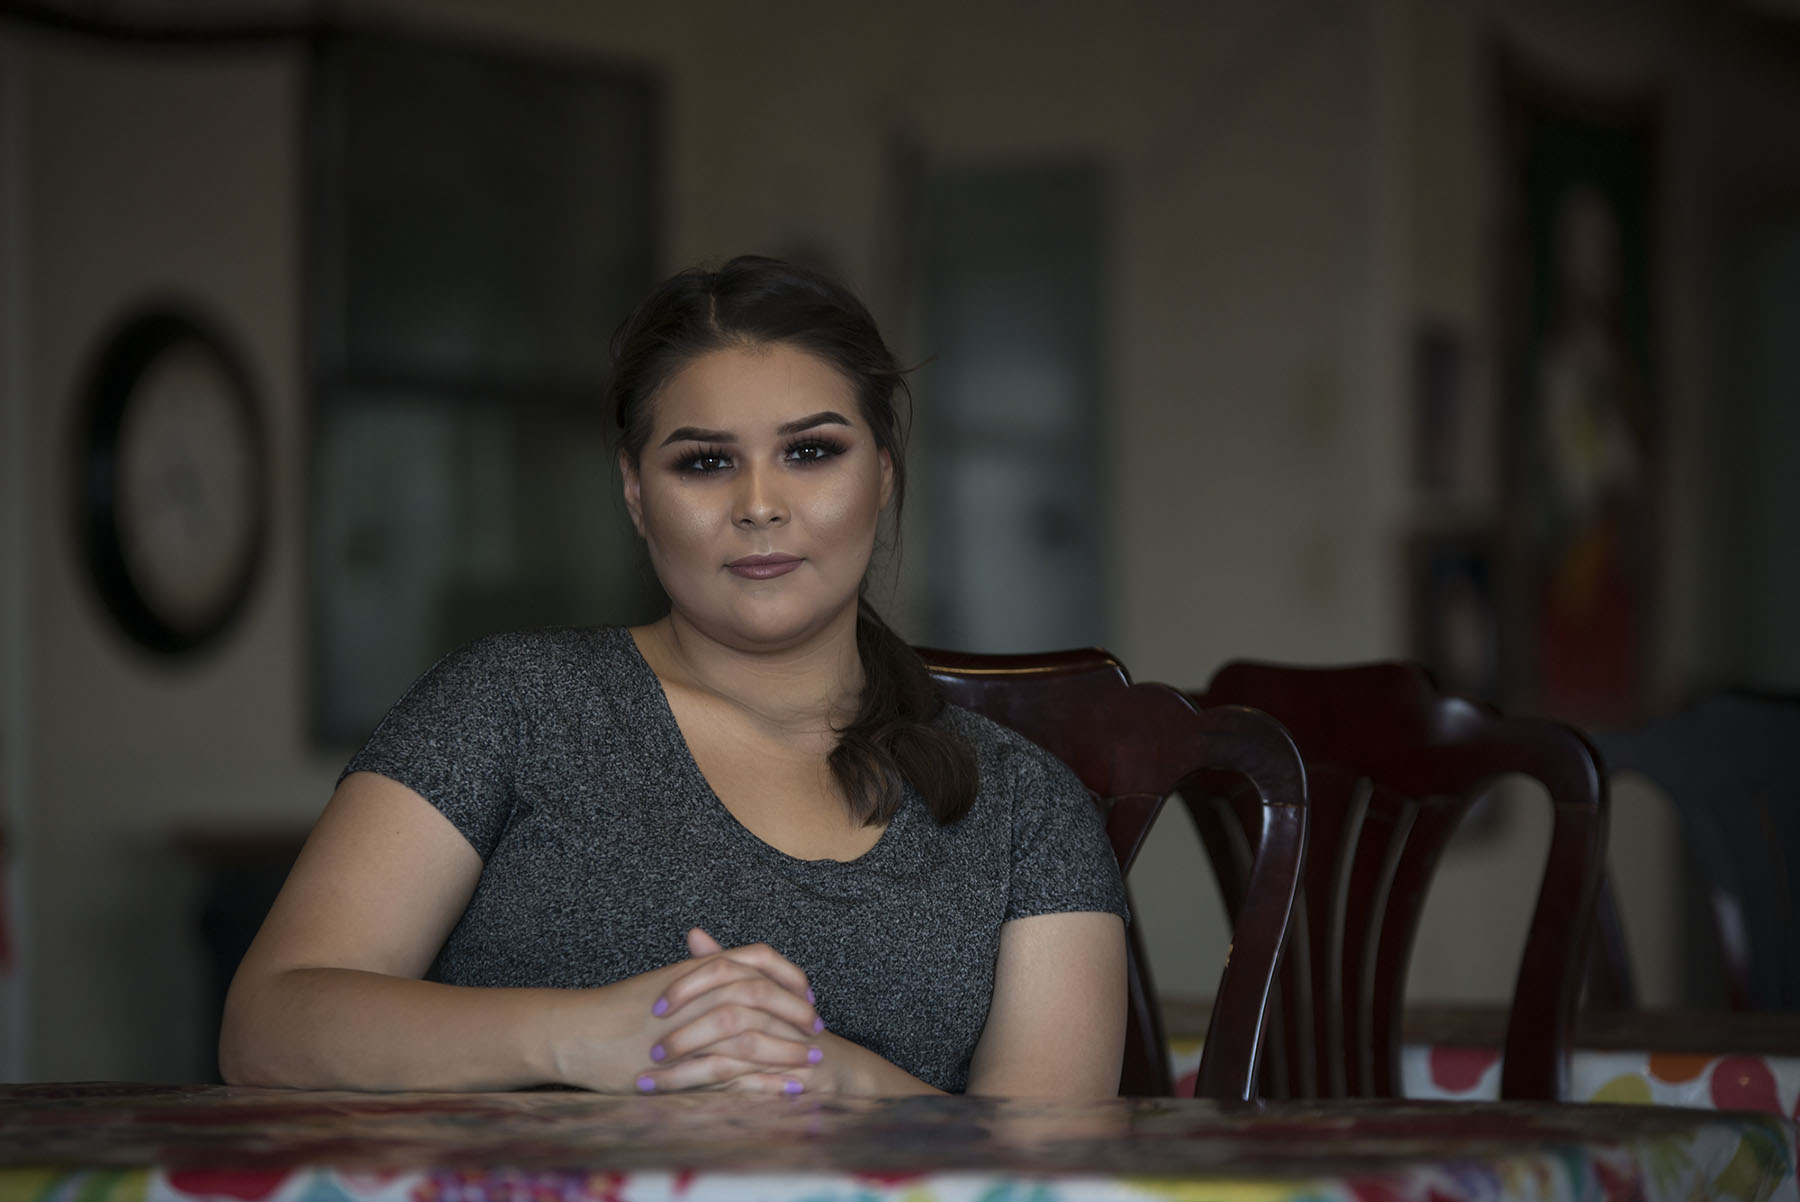 Janelle Rodriguez turns 18 after the presidential election this year. Although she will not be able to vote, she believes voting is important and hopes to encourage her friends to vote. (Photo by Roman Knertser, audio by Pam Ortega/News21)